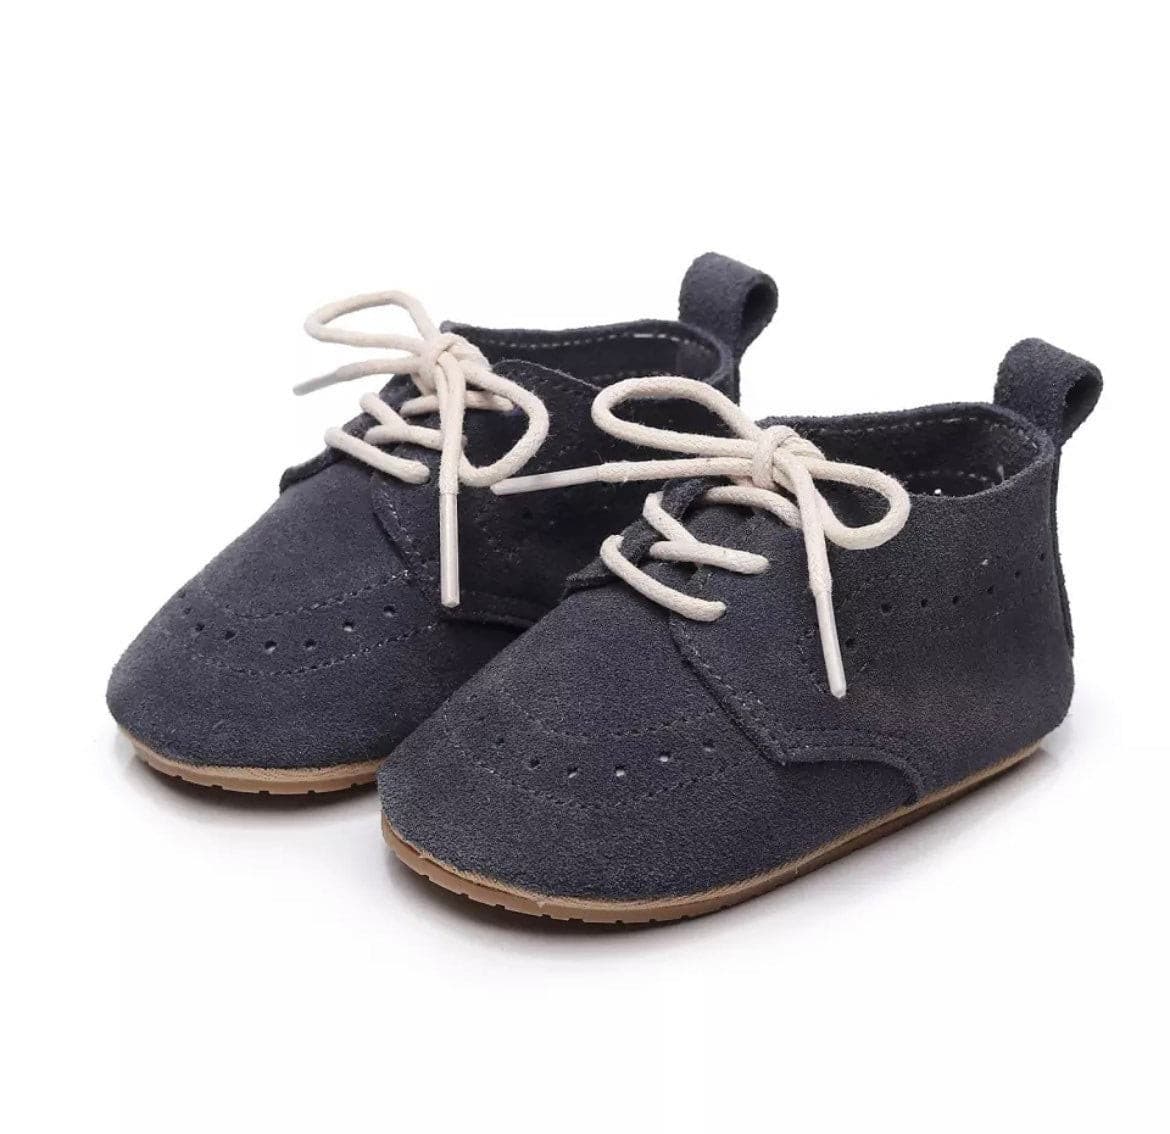 Baby Oxford Brogues - Handmade Genuine Leather Baby Shoes, Navy Suede Leather.